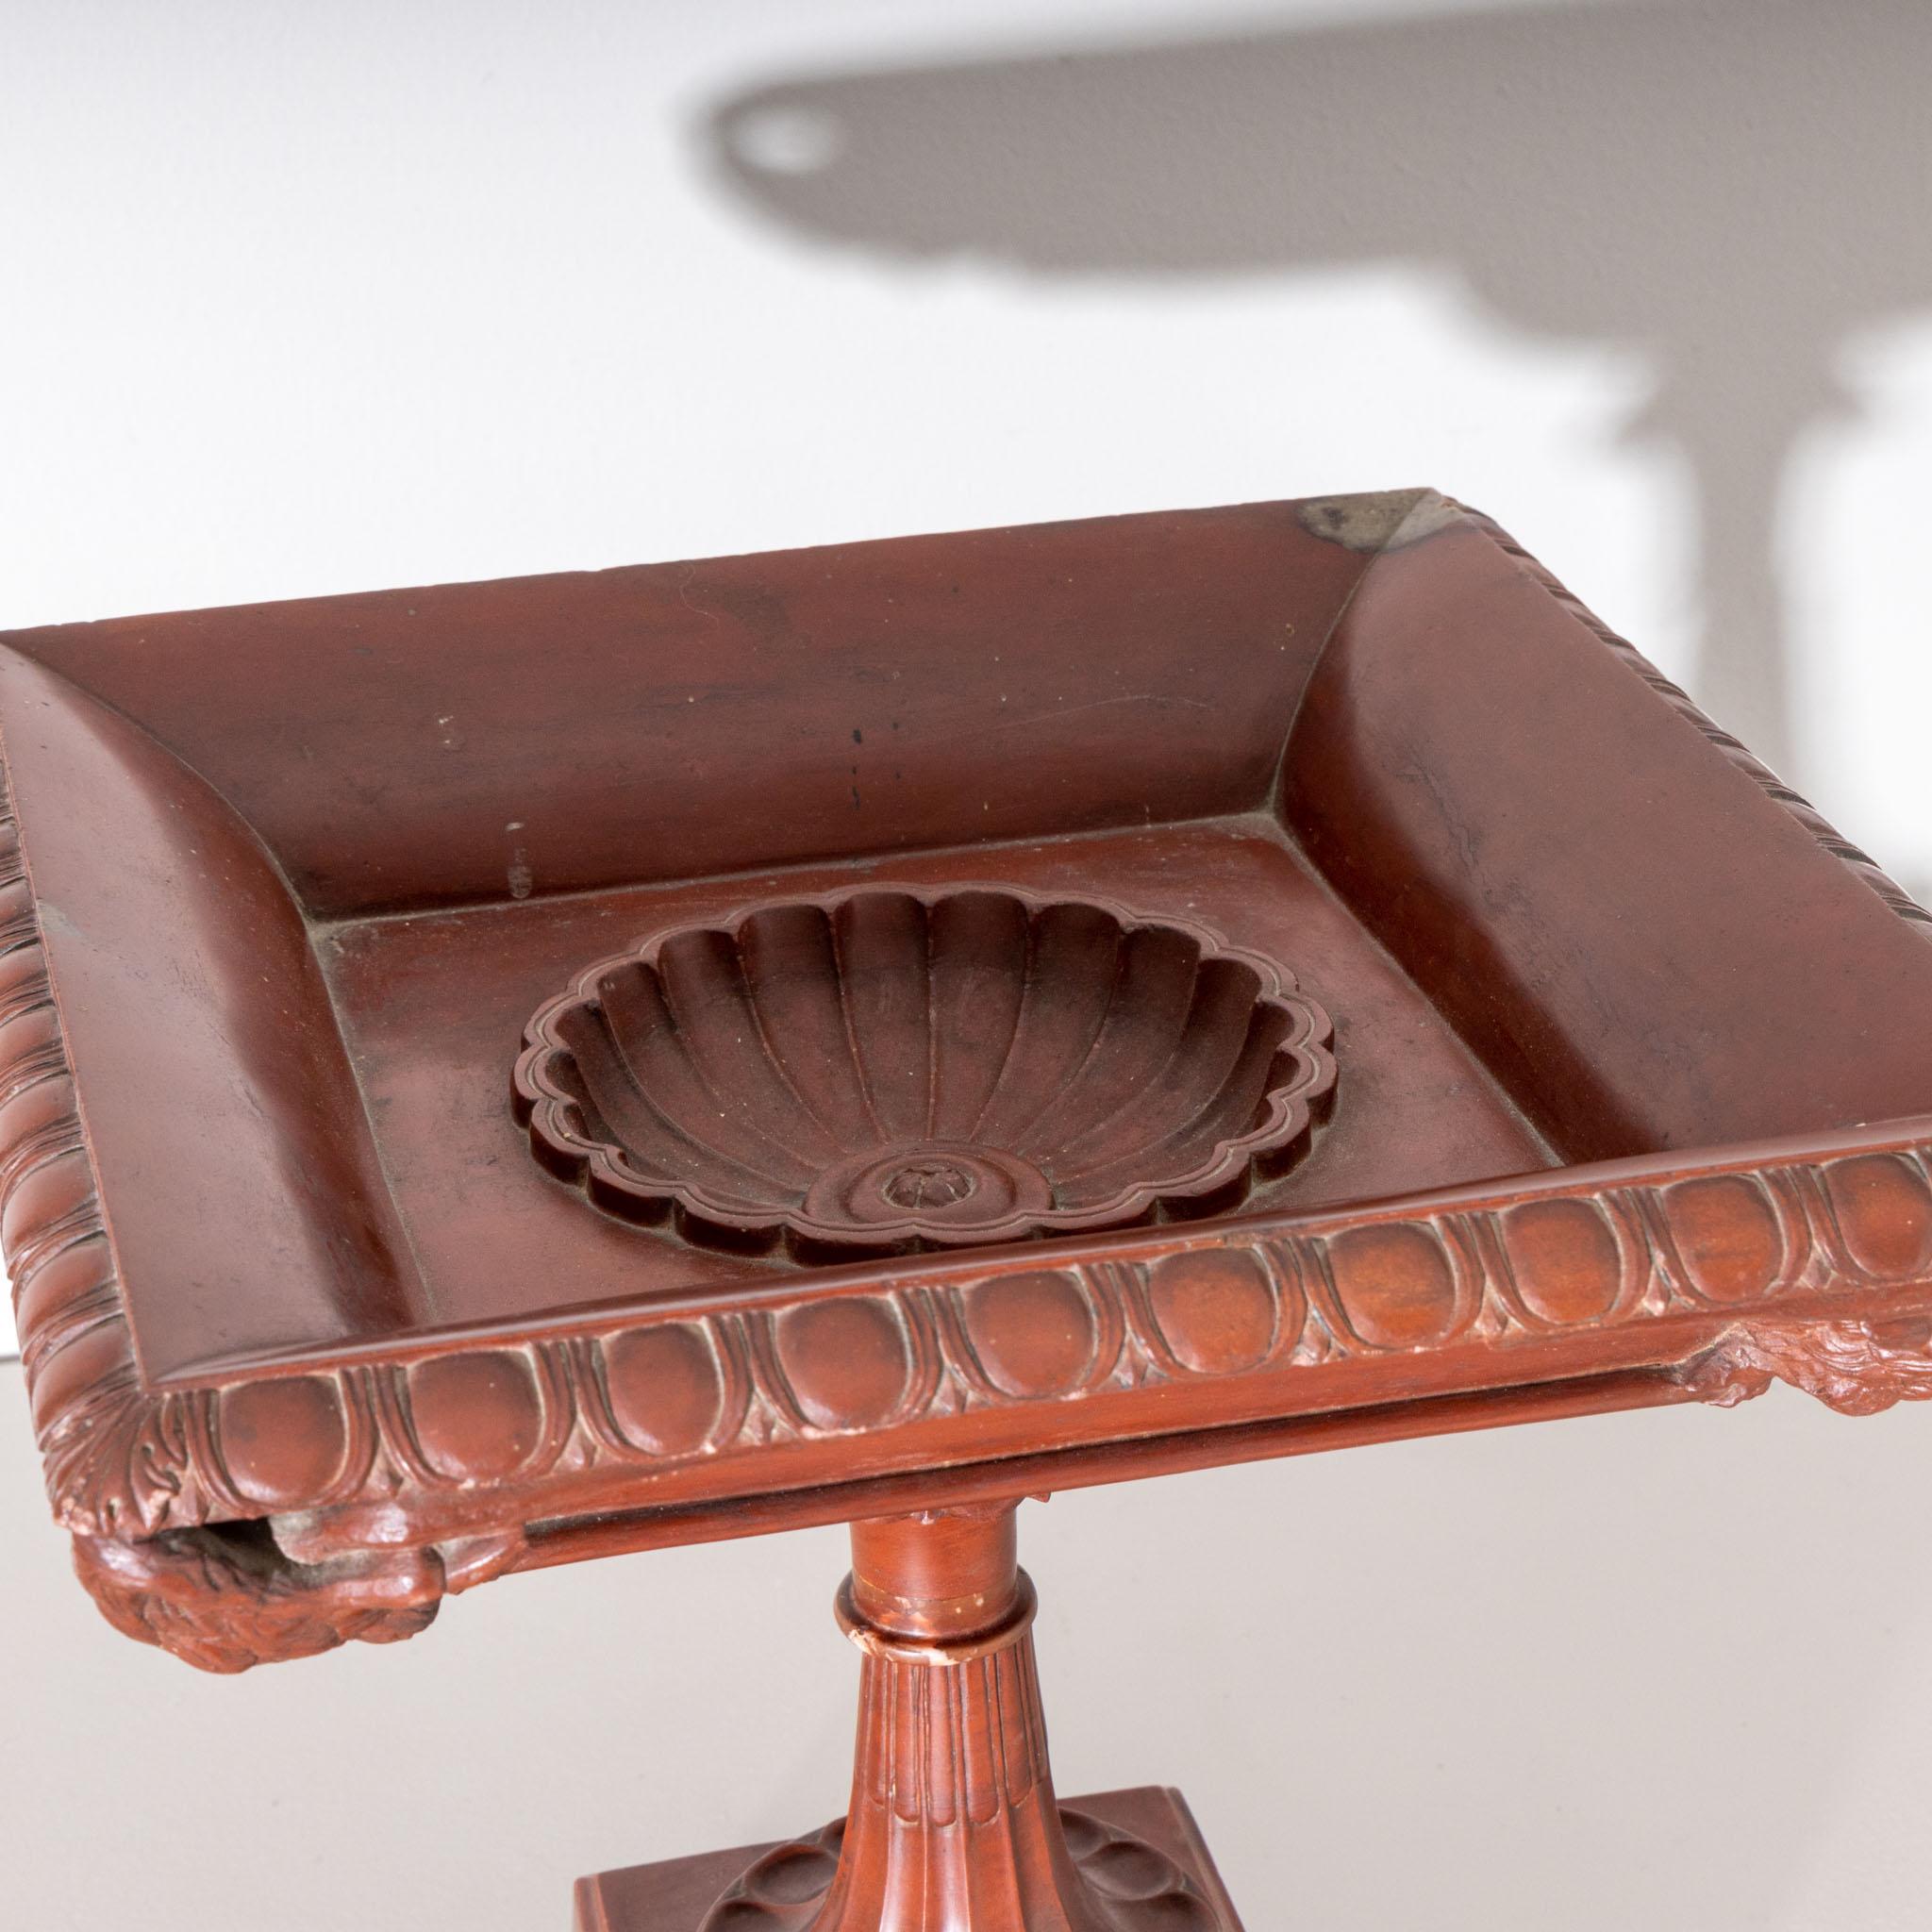 Large Italian tazza in rosso antico with swan decorations on the corners and square bowl, godron wall and fluted shaft on a square base. Based on the 1787 Tazza in rosso antico by Francesco Antonio Franzoni in the Vatican Museums.